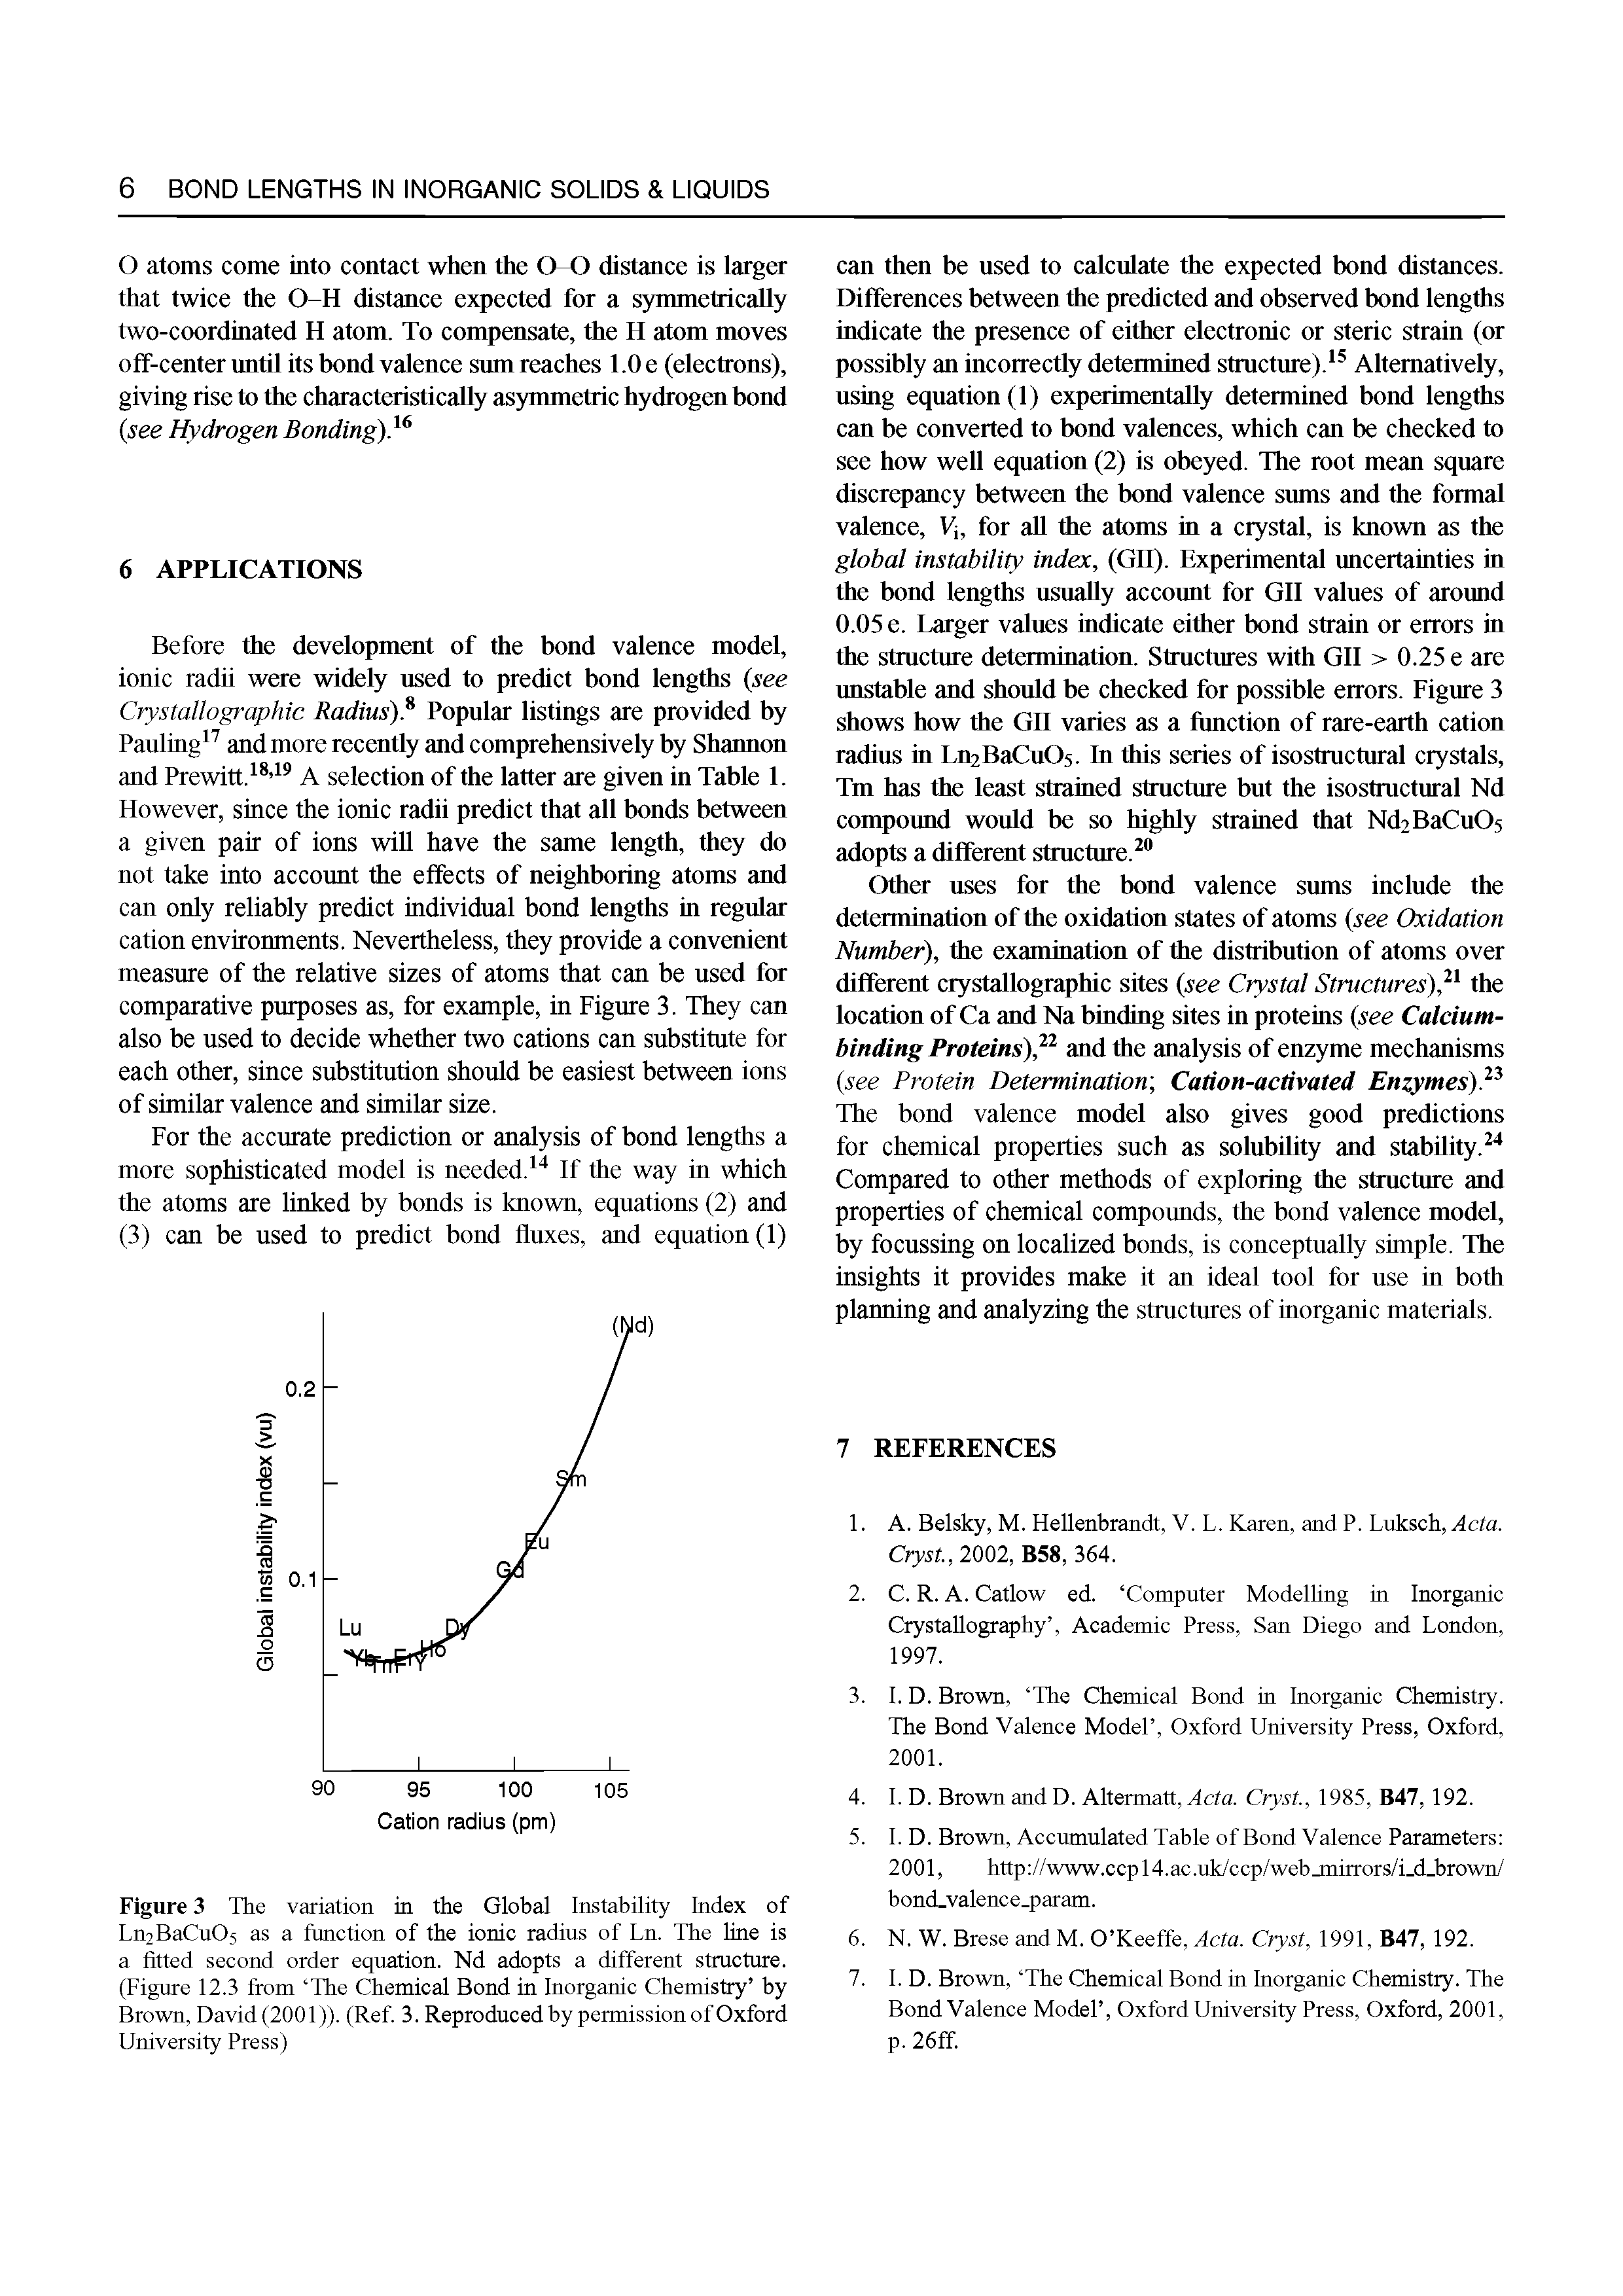 Figure 3 The variation in the Global Instability Index of Ln2BaCu05 as a function of the ionic radius of Ln. The line is a fitted second order equation. Nd adopts a different structure. (Figure 12.3 from The Chemical Bond in Inorganic Chemistry by Brown, David (2001)). (Ref. 3. Reproduced by permission of Oxford University Press)...